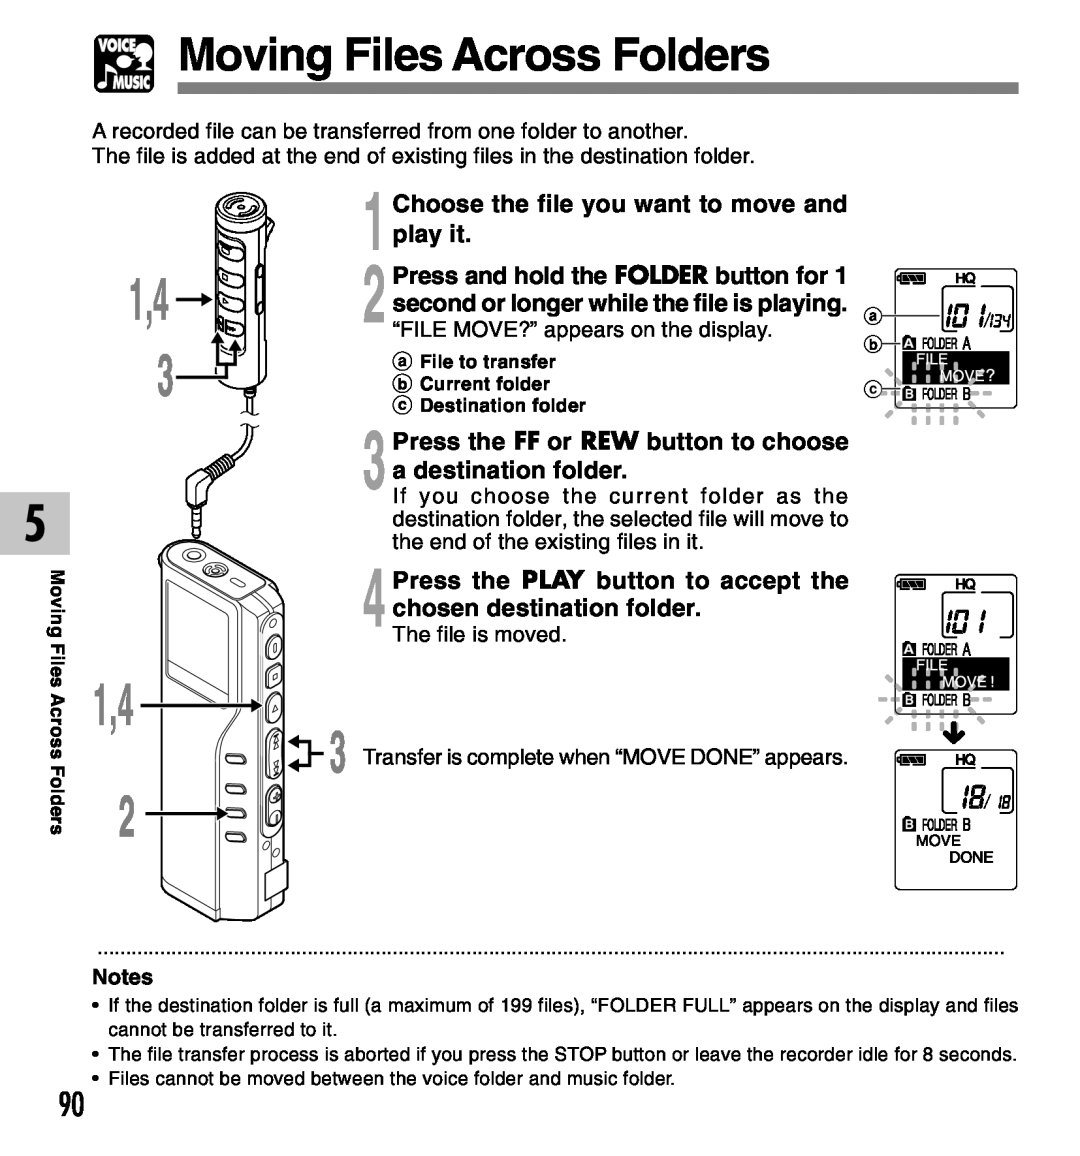 Olympus DM-10, DM-20 manual Moving Files Across Folders, Choose the file you want to move and, 1play it, a File to transfer 